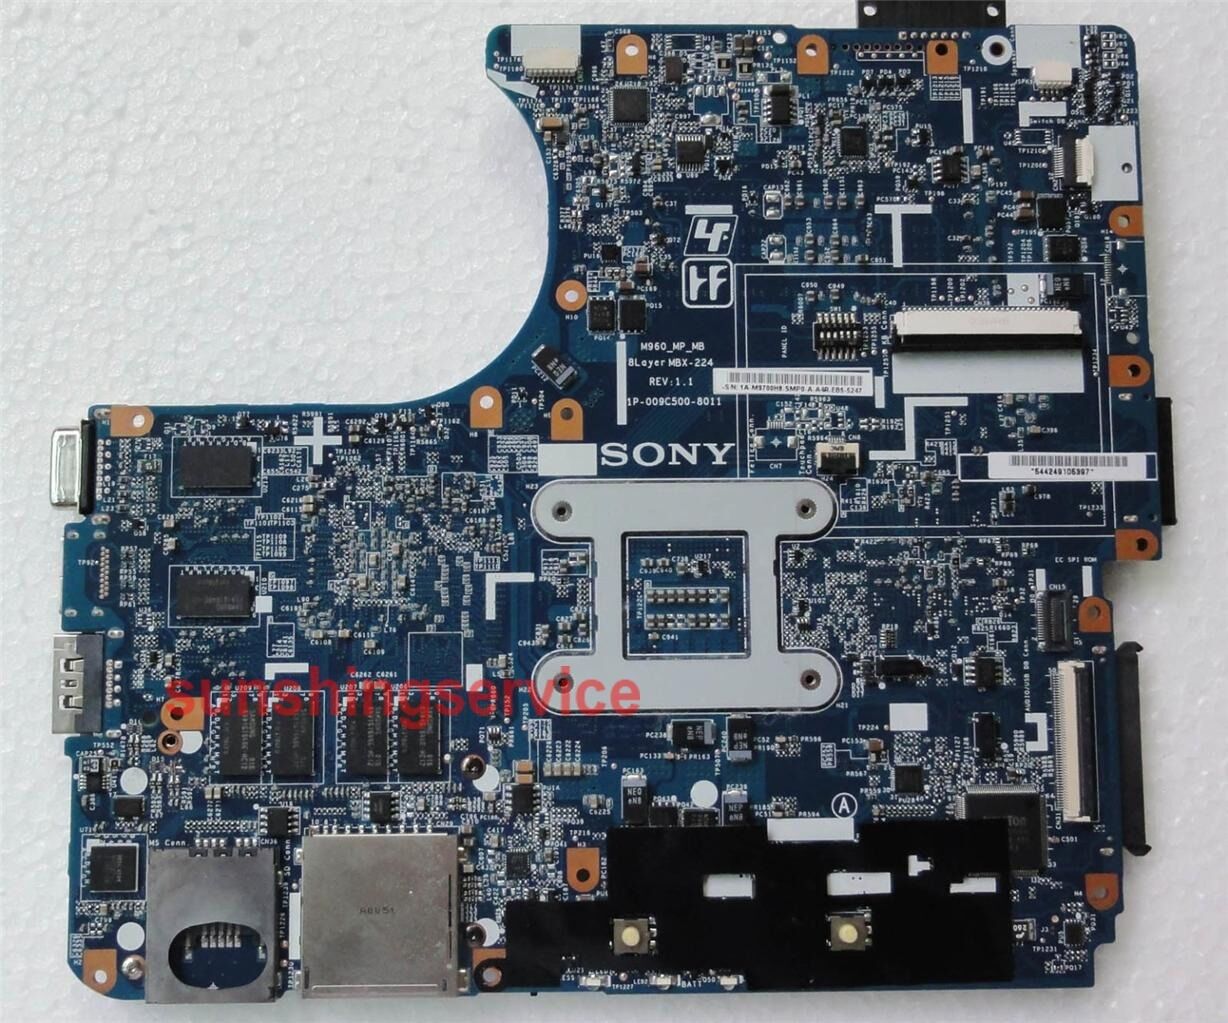 Sony Vaio VPC-EB VPC-EA Motherboard M960 MBX-224 A1771575A TESTED Brand: Sony Socket Type: PGA 989 MPN: M